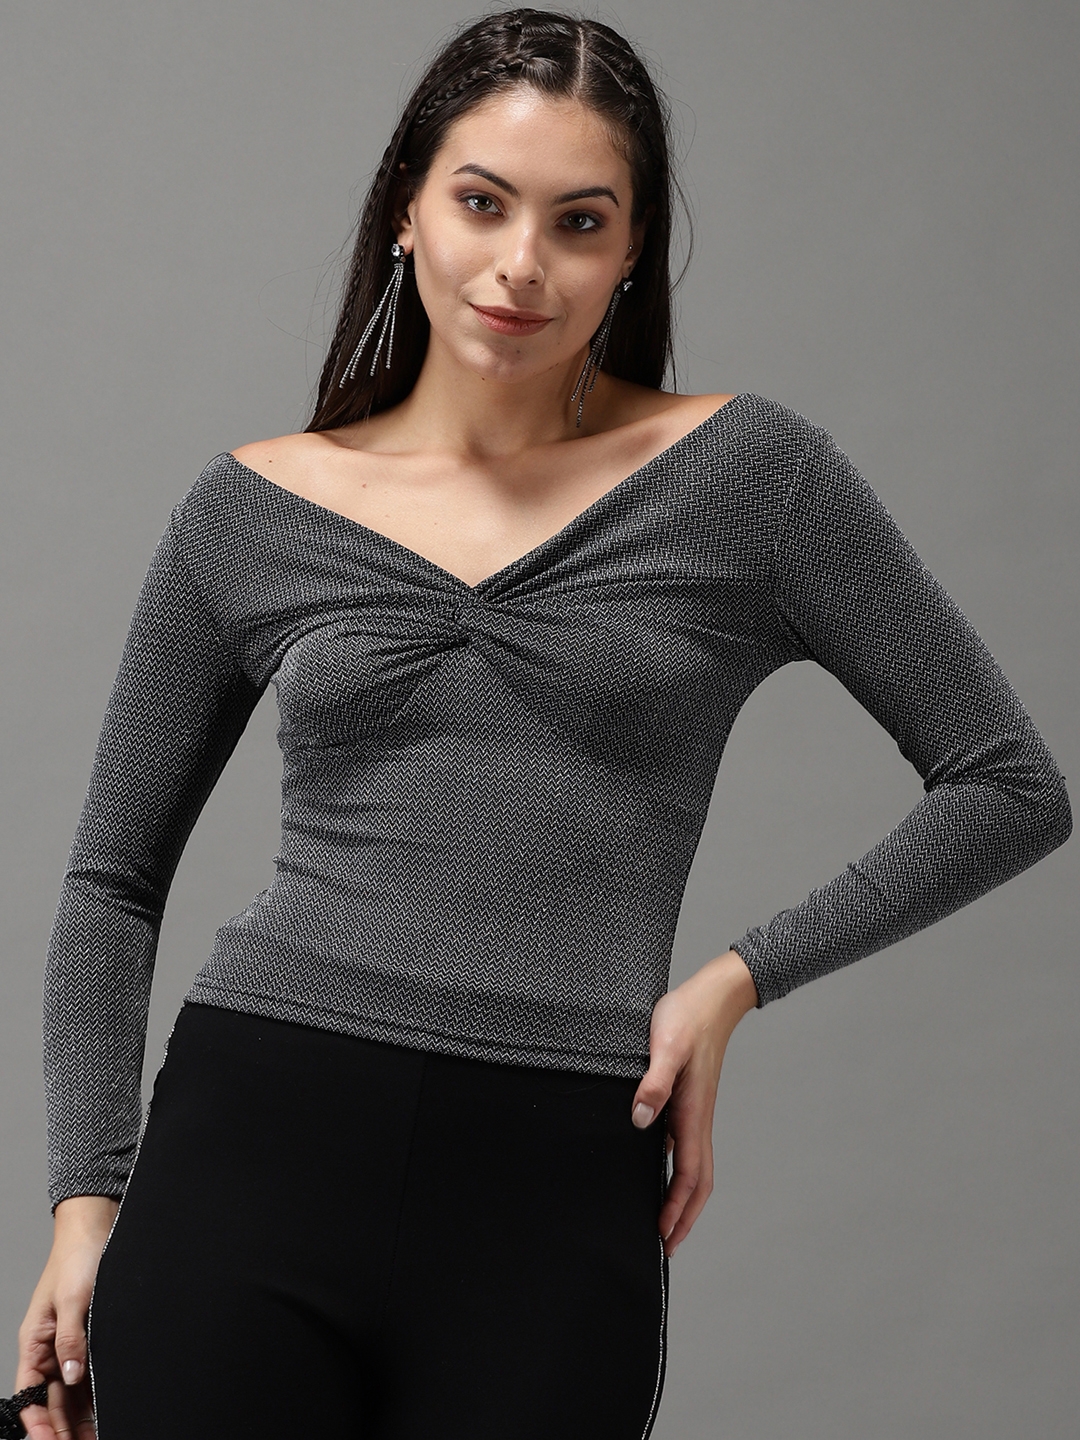 Women's Silver Polyester Solid Tops